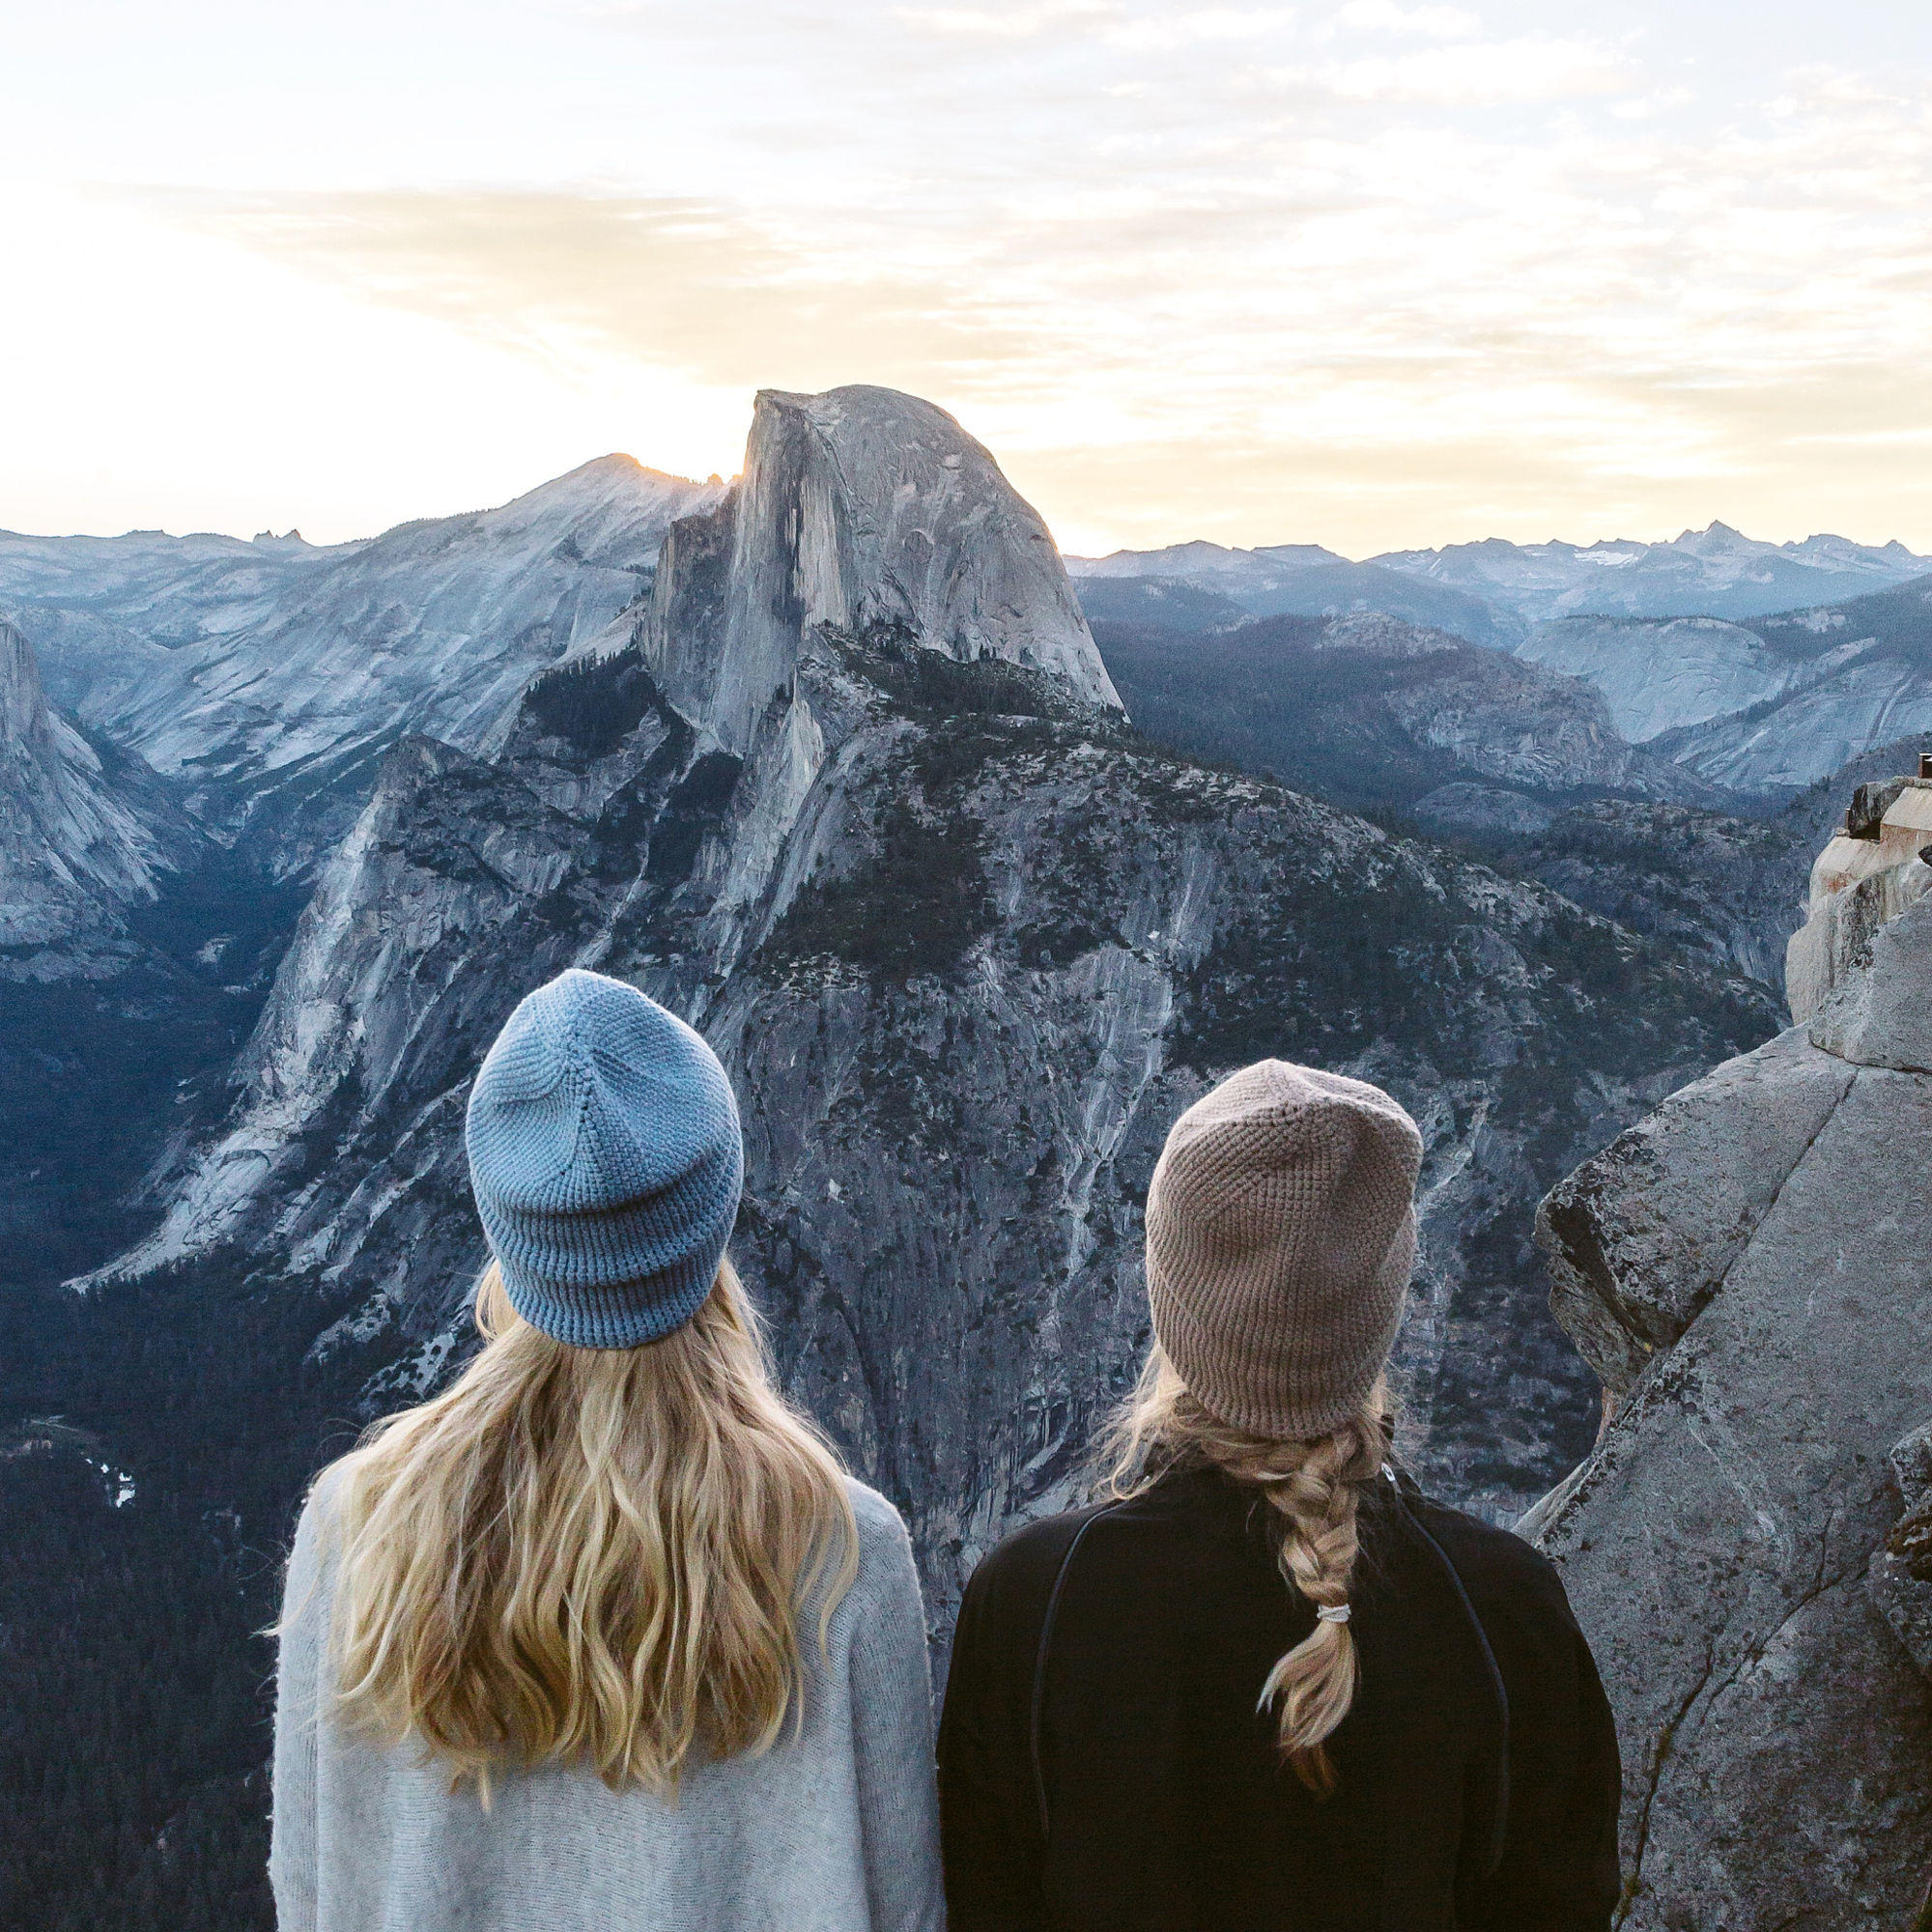 Amazing morning in Yosemite valley with sleepy eyes, mountain peaks and good friends.